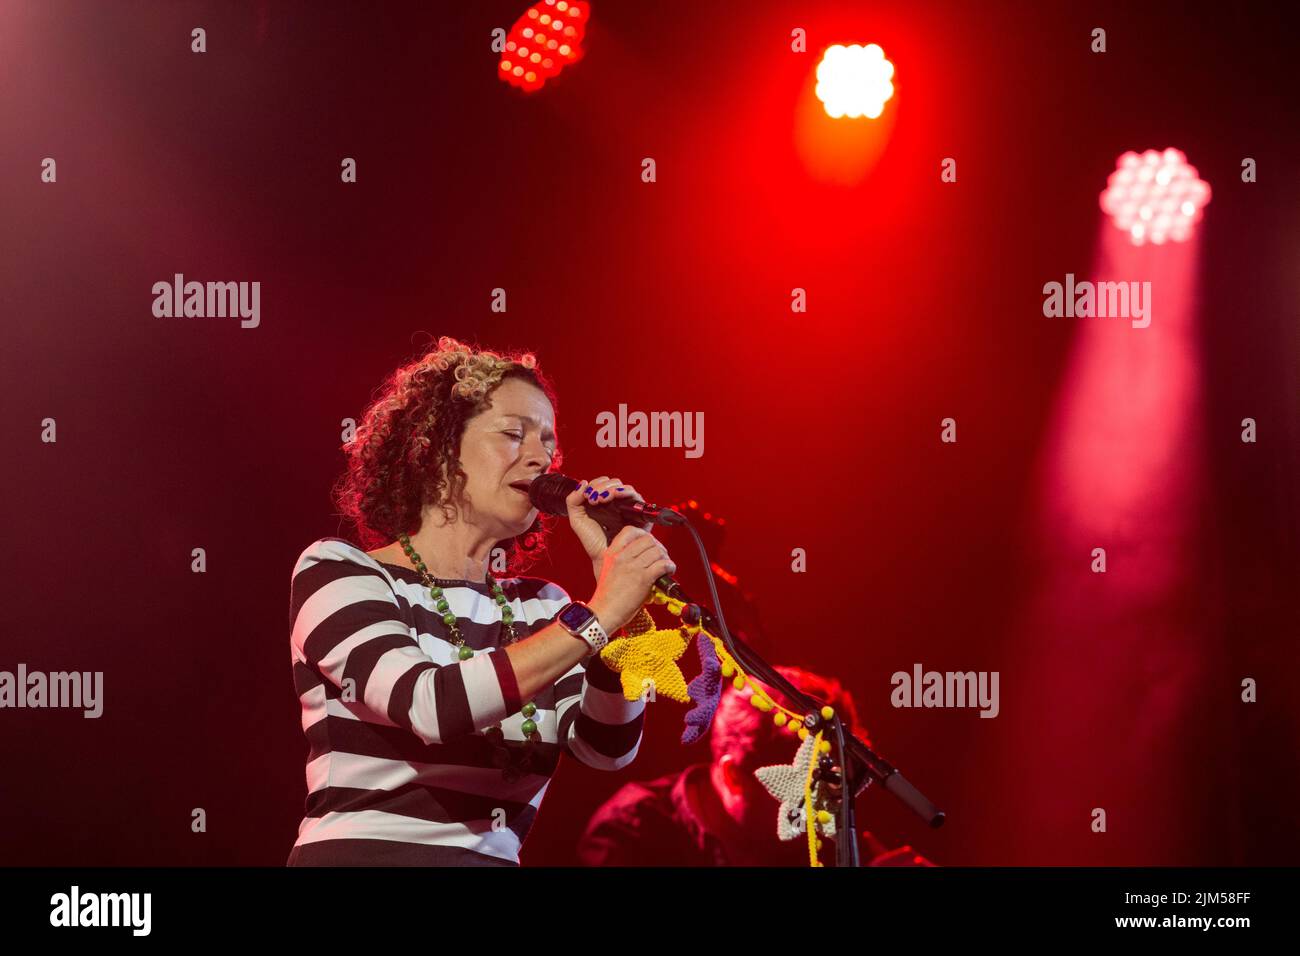 Sidmouth, 4th August 2022 Kate Rusby headlines the bill at the Sidmouth Folk Festival as she celebrates 30 years in her unofficial role as the Queen of British folk music. Tony Charnock/Alamy Live News Stock Photo